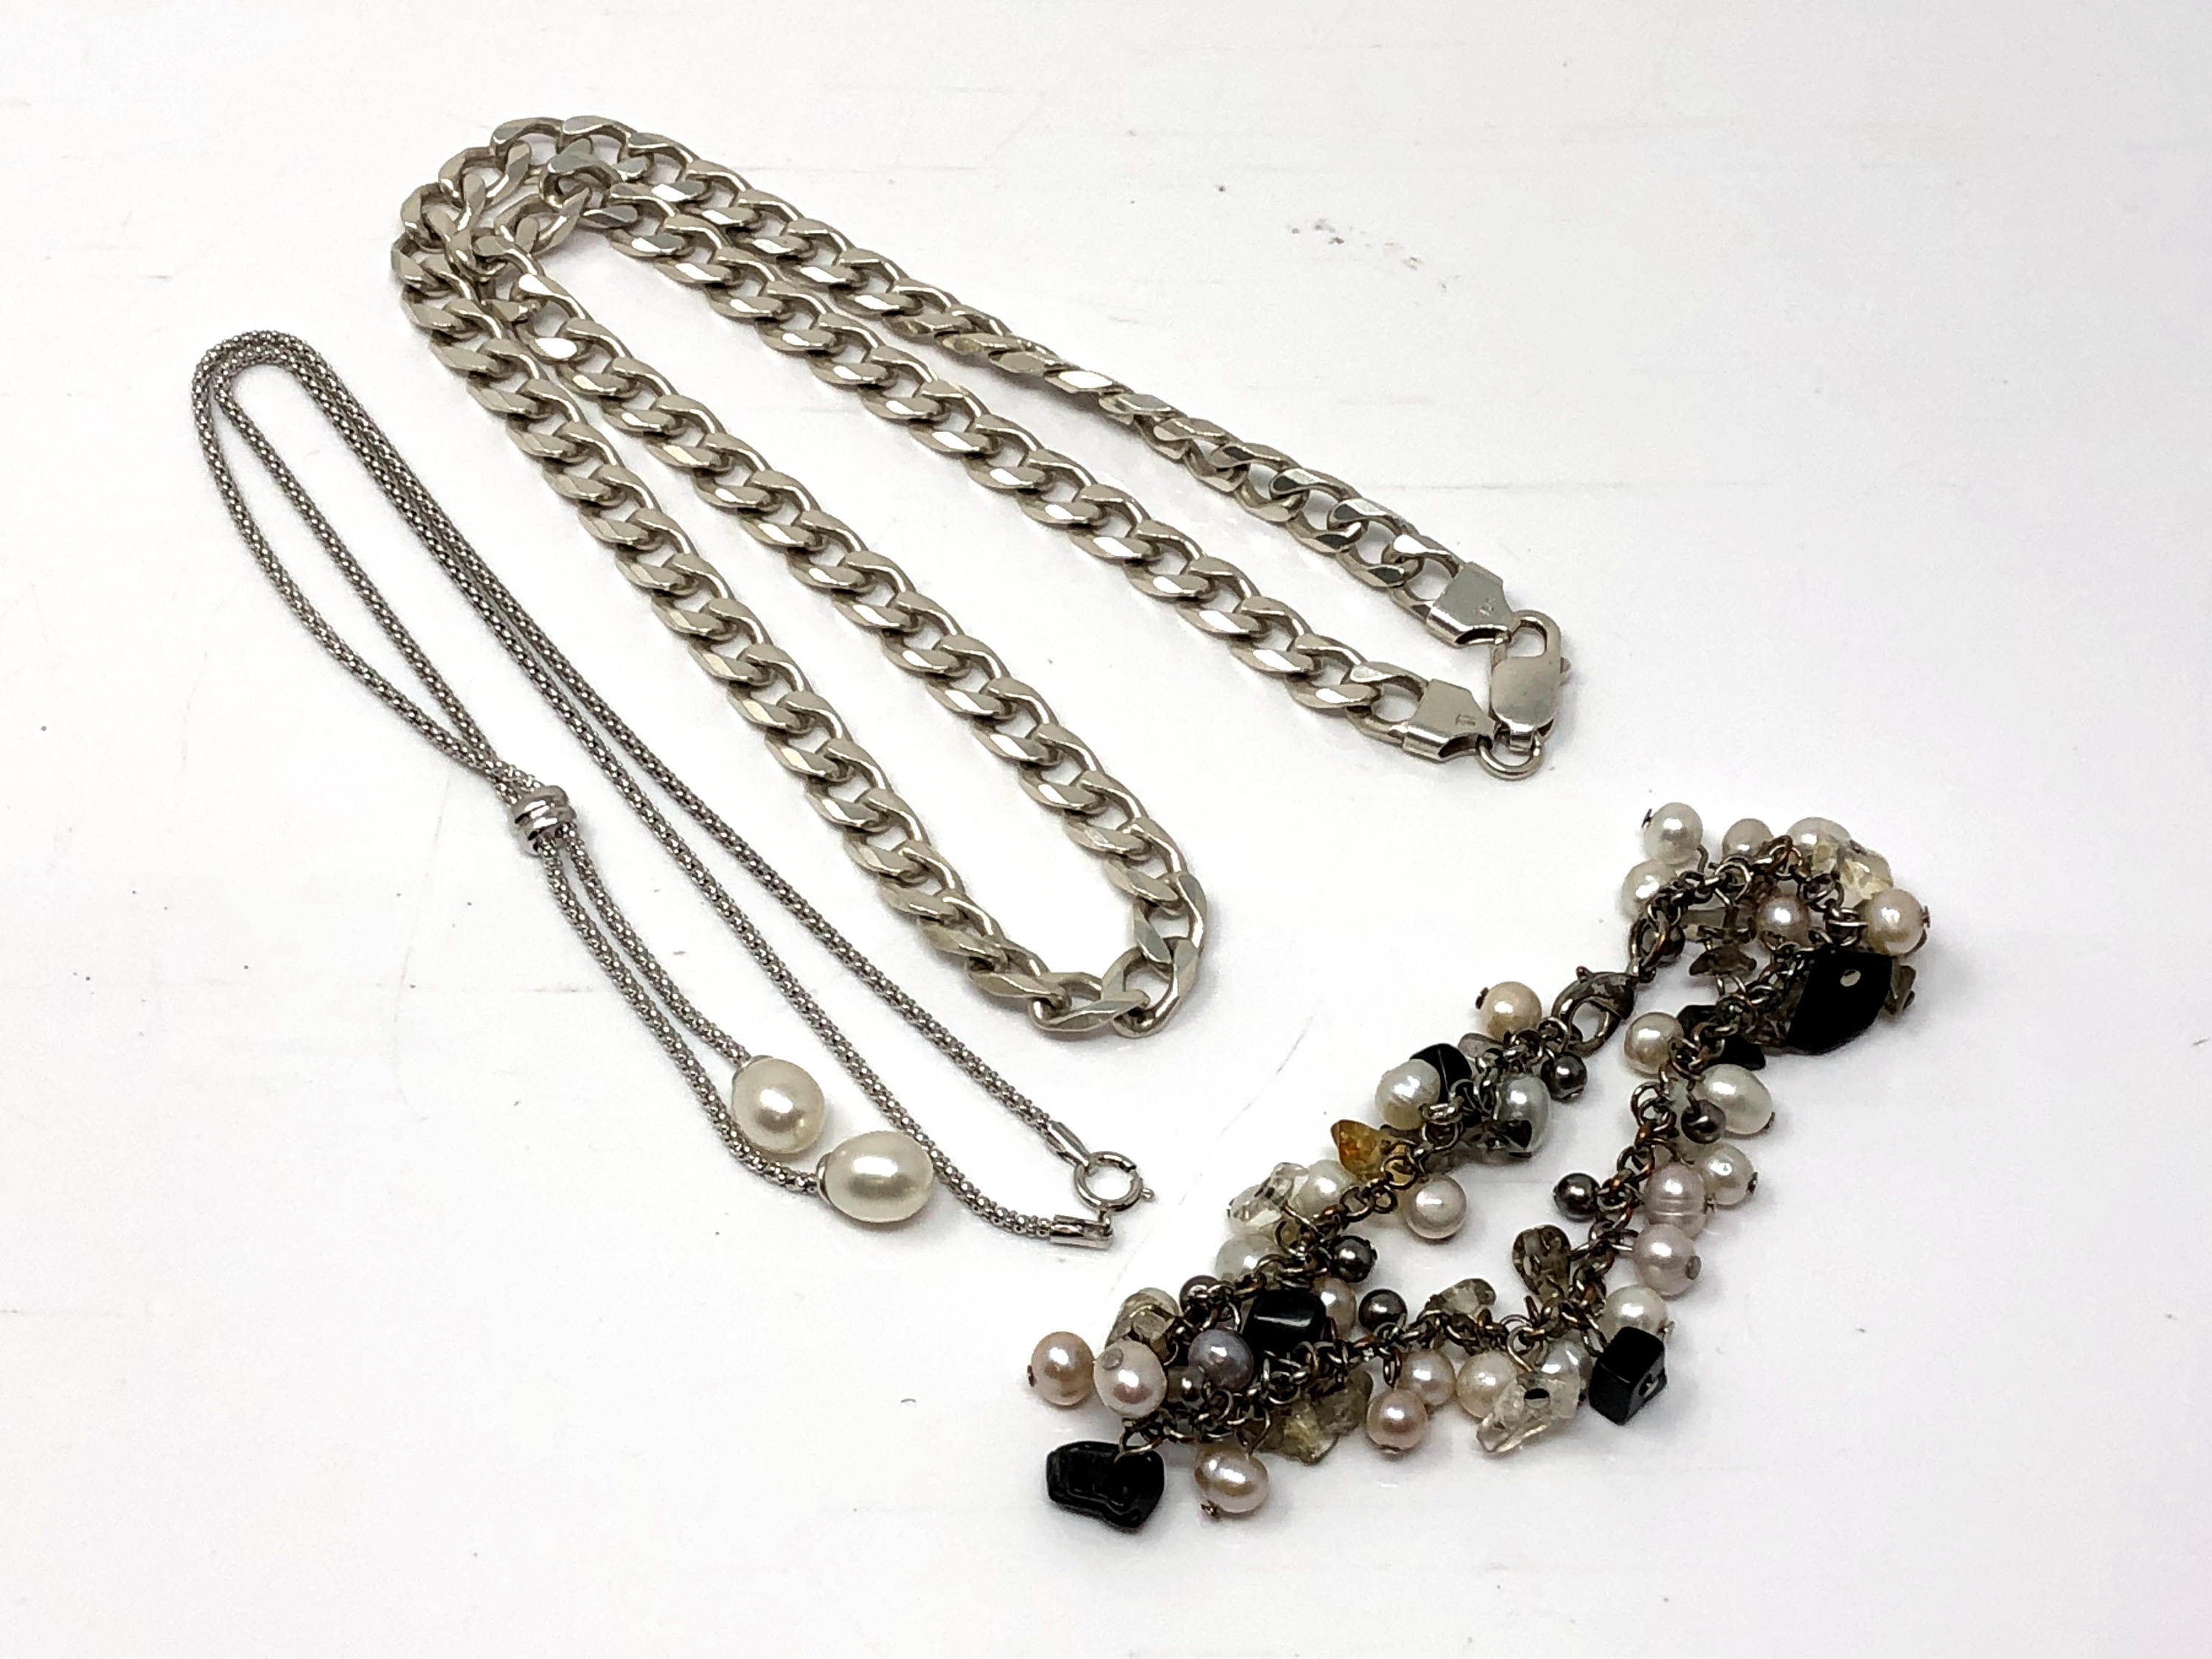 A silver curb link necklace, an unusual pearl bracelet and a pearl necklace.